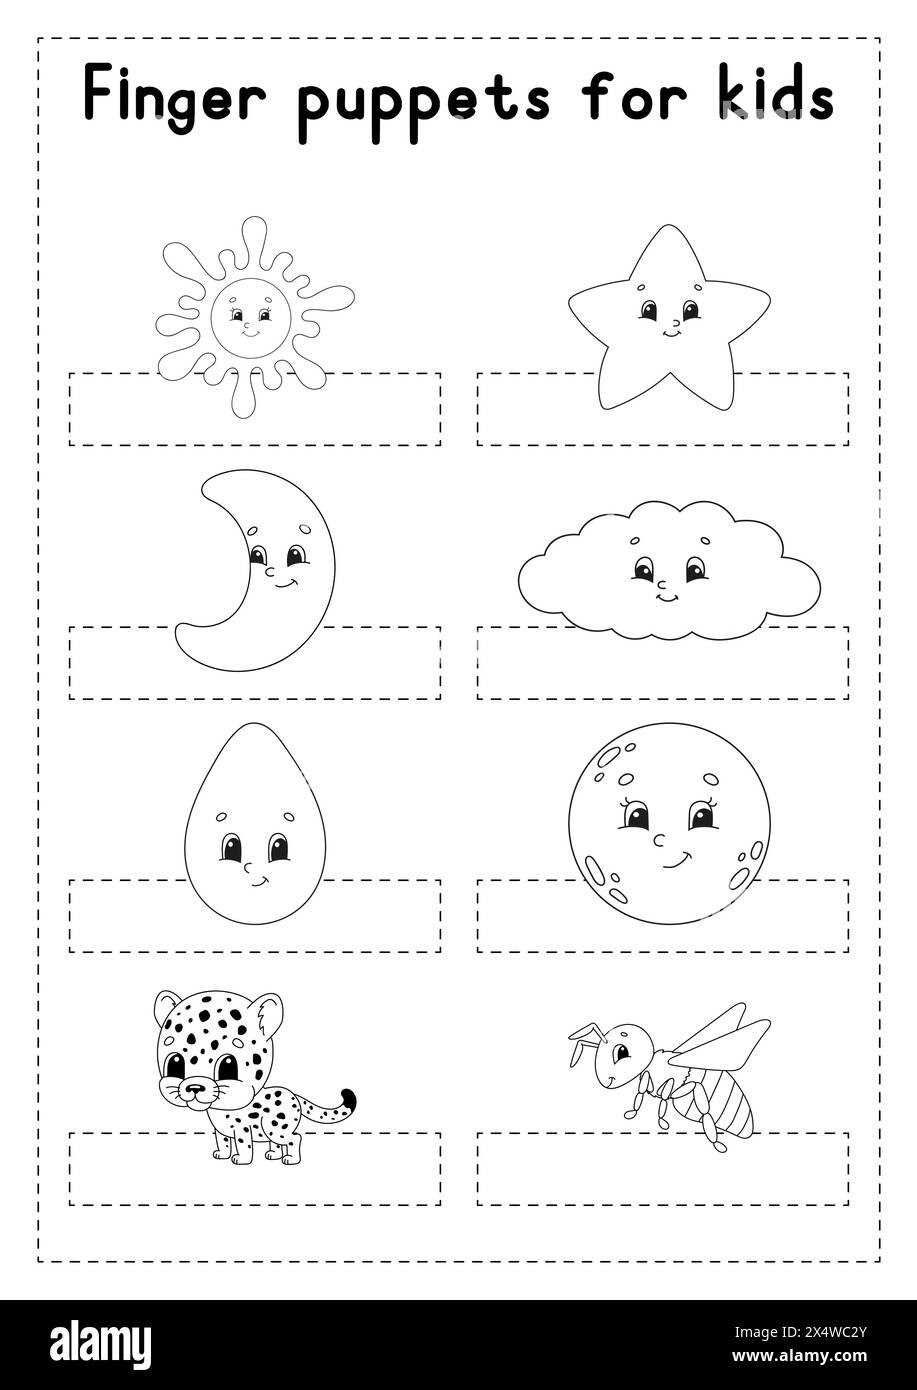 Finger puppets. Coloring page for kids. Vector illustration. Stock Vector